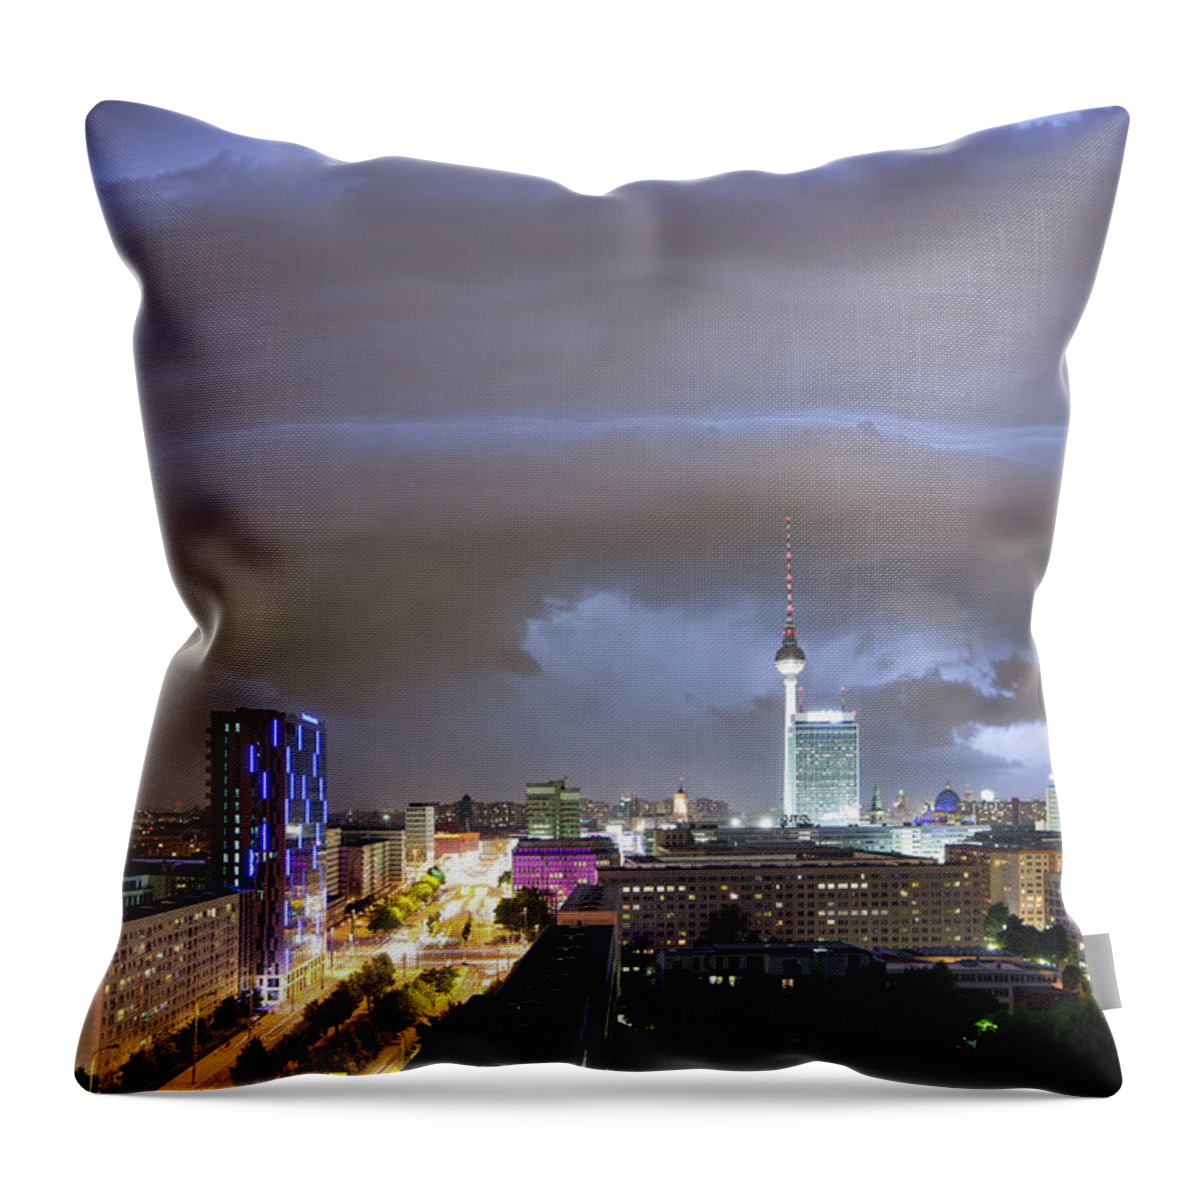 Berlin Throw Pillow featuring the photograph Thunderstorm With Berlin Skyline by Spreephoto.de